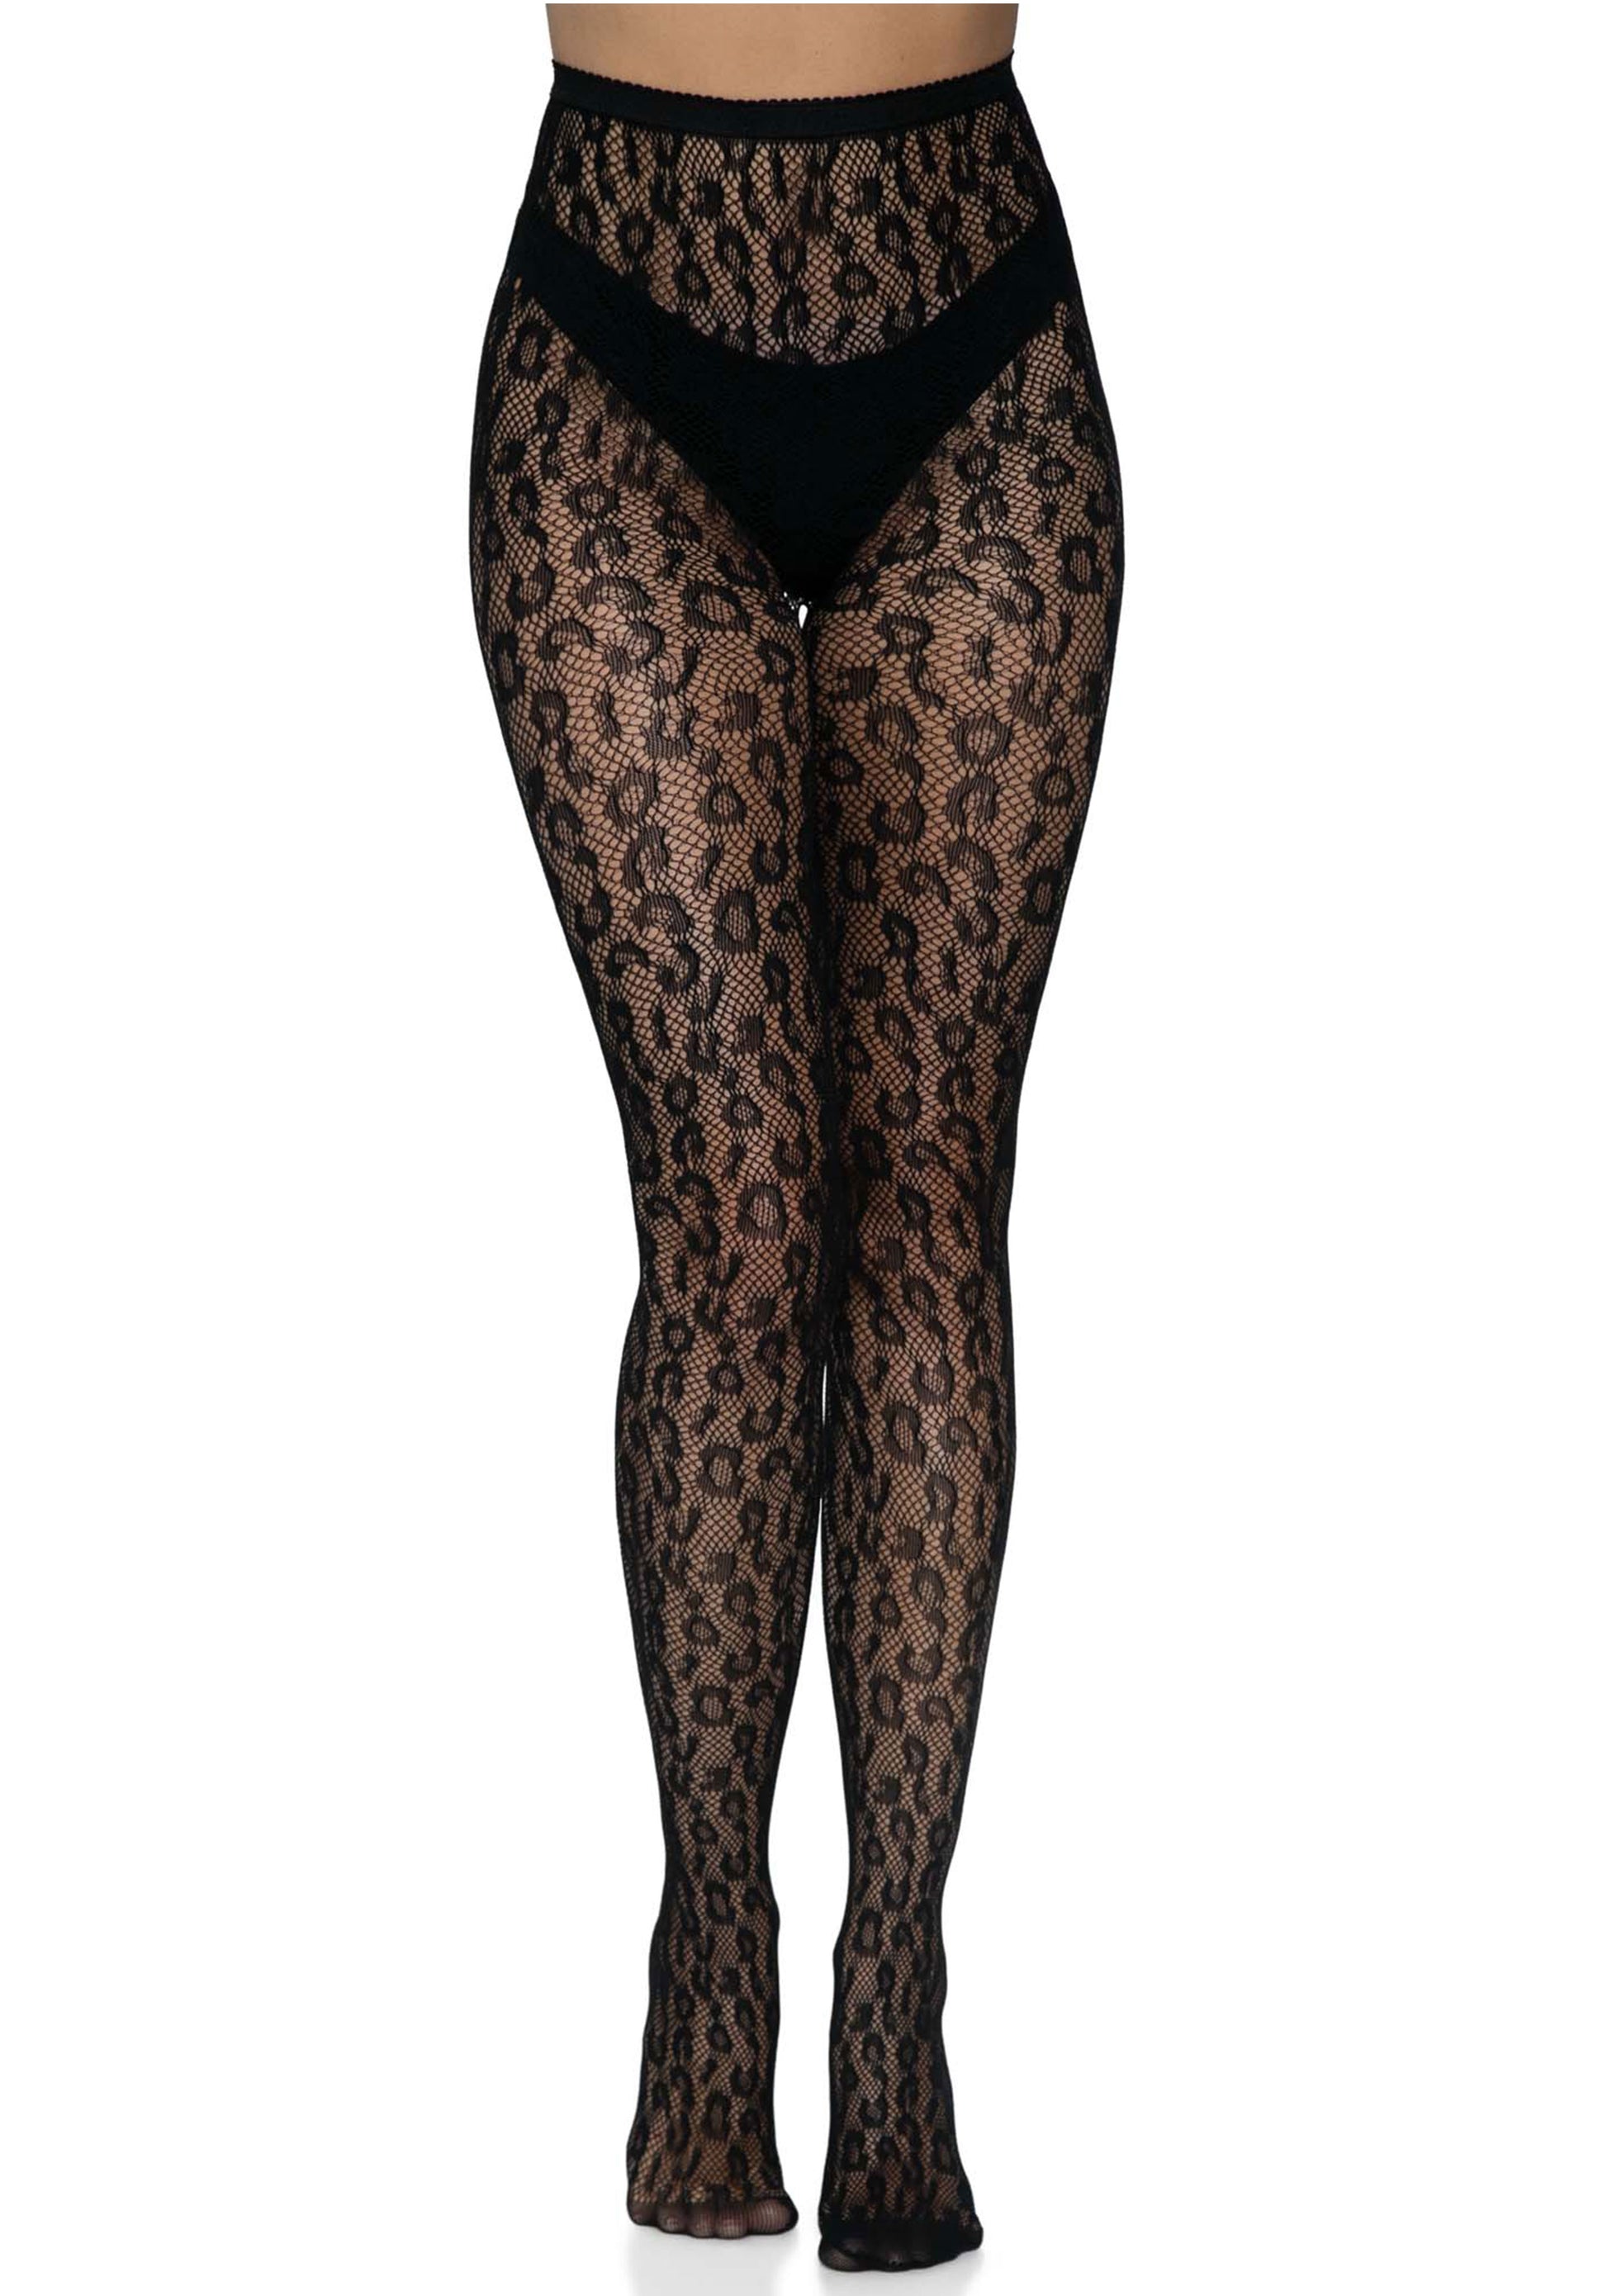 Leg Avenue womens Sheer Leopard Tights Hosiery, Black, One Size US:  Clothing, Shoes & Jewelry 